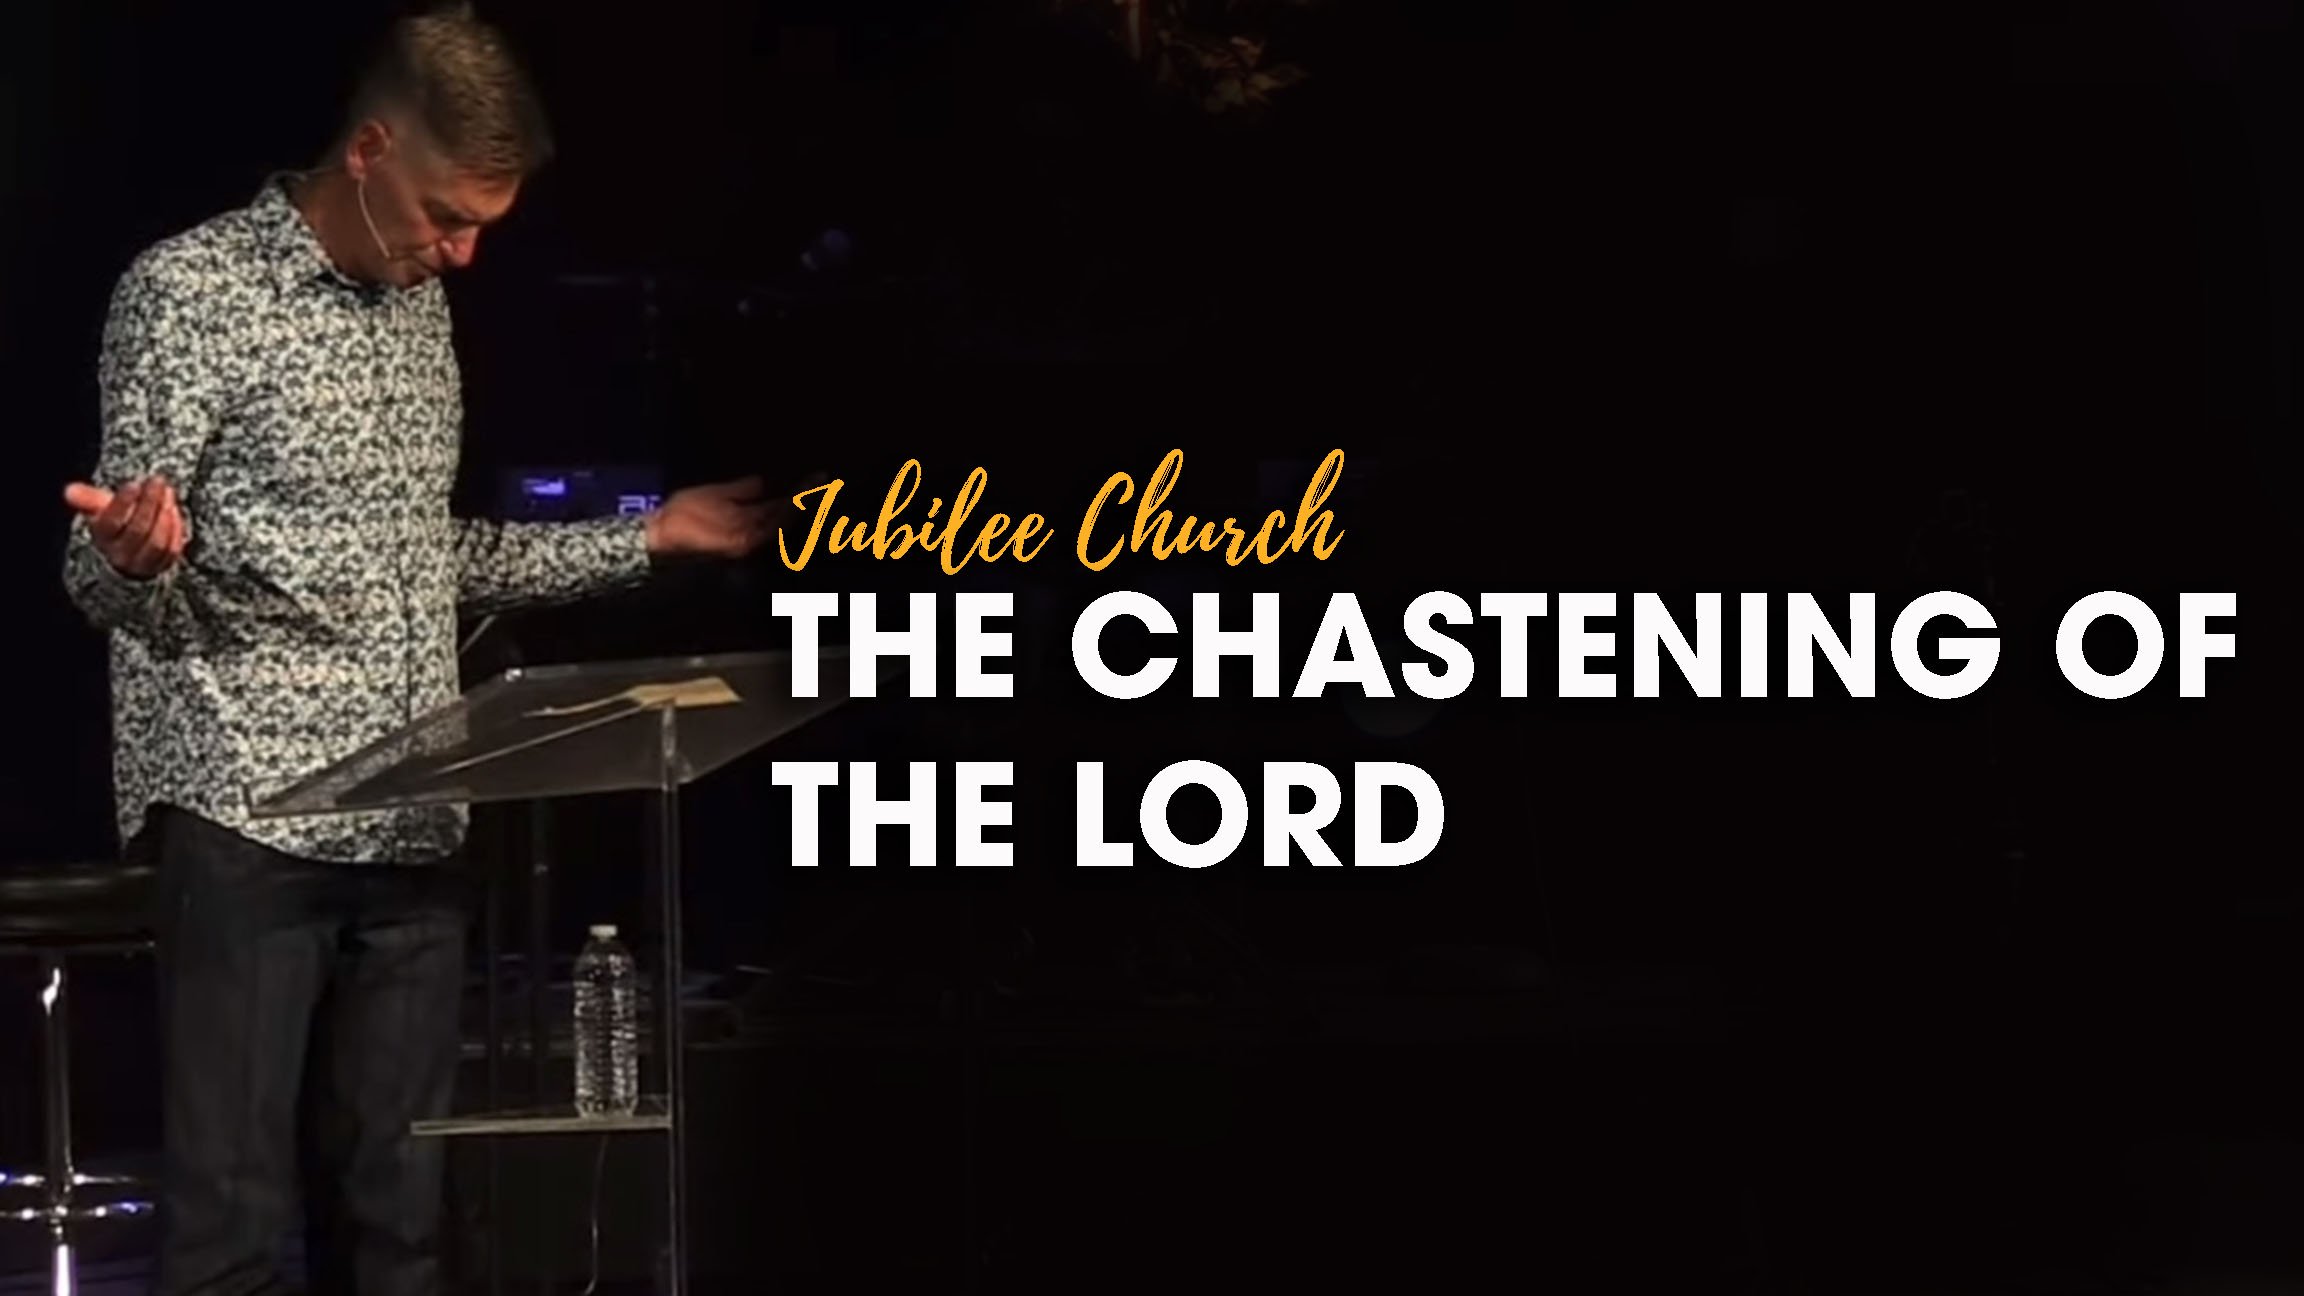 The Chastening of the Lord